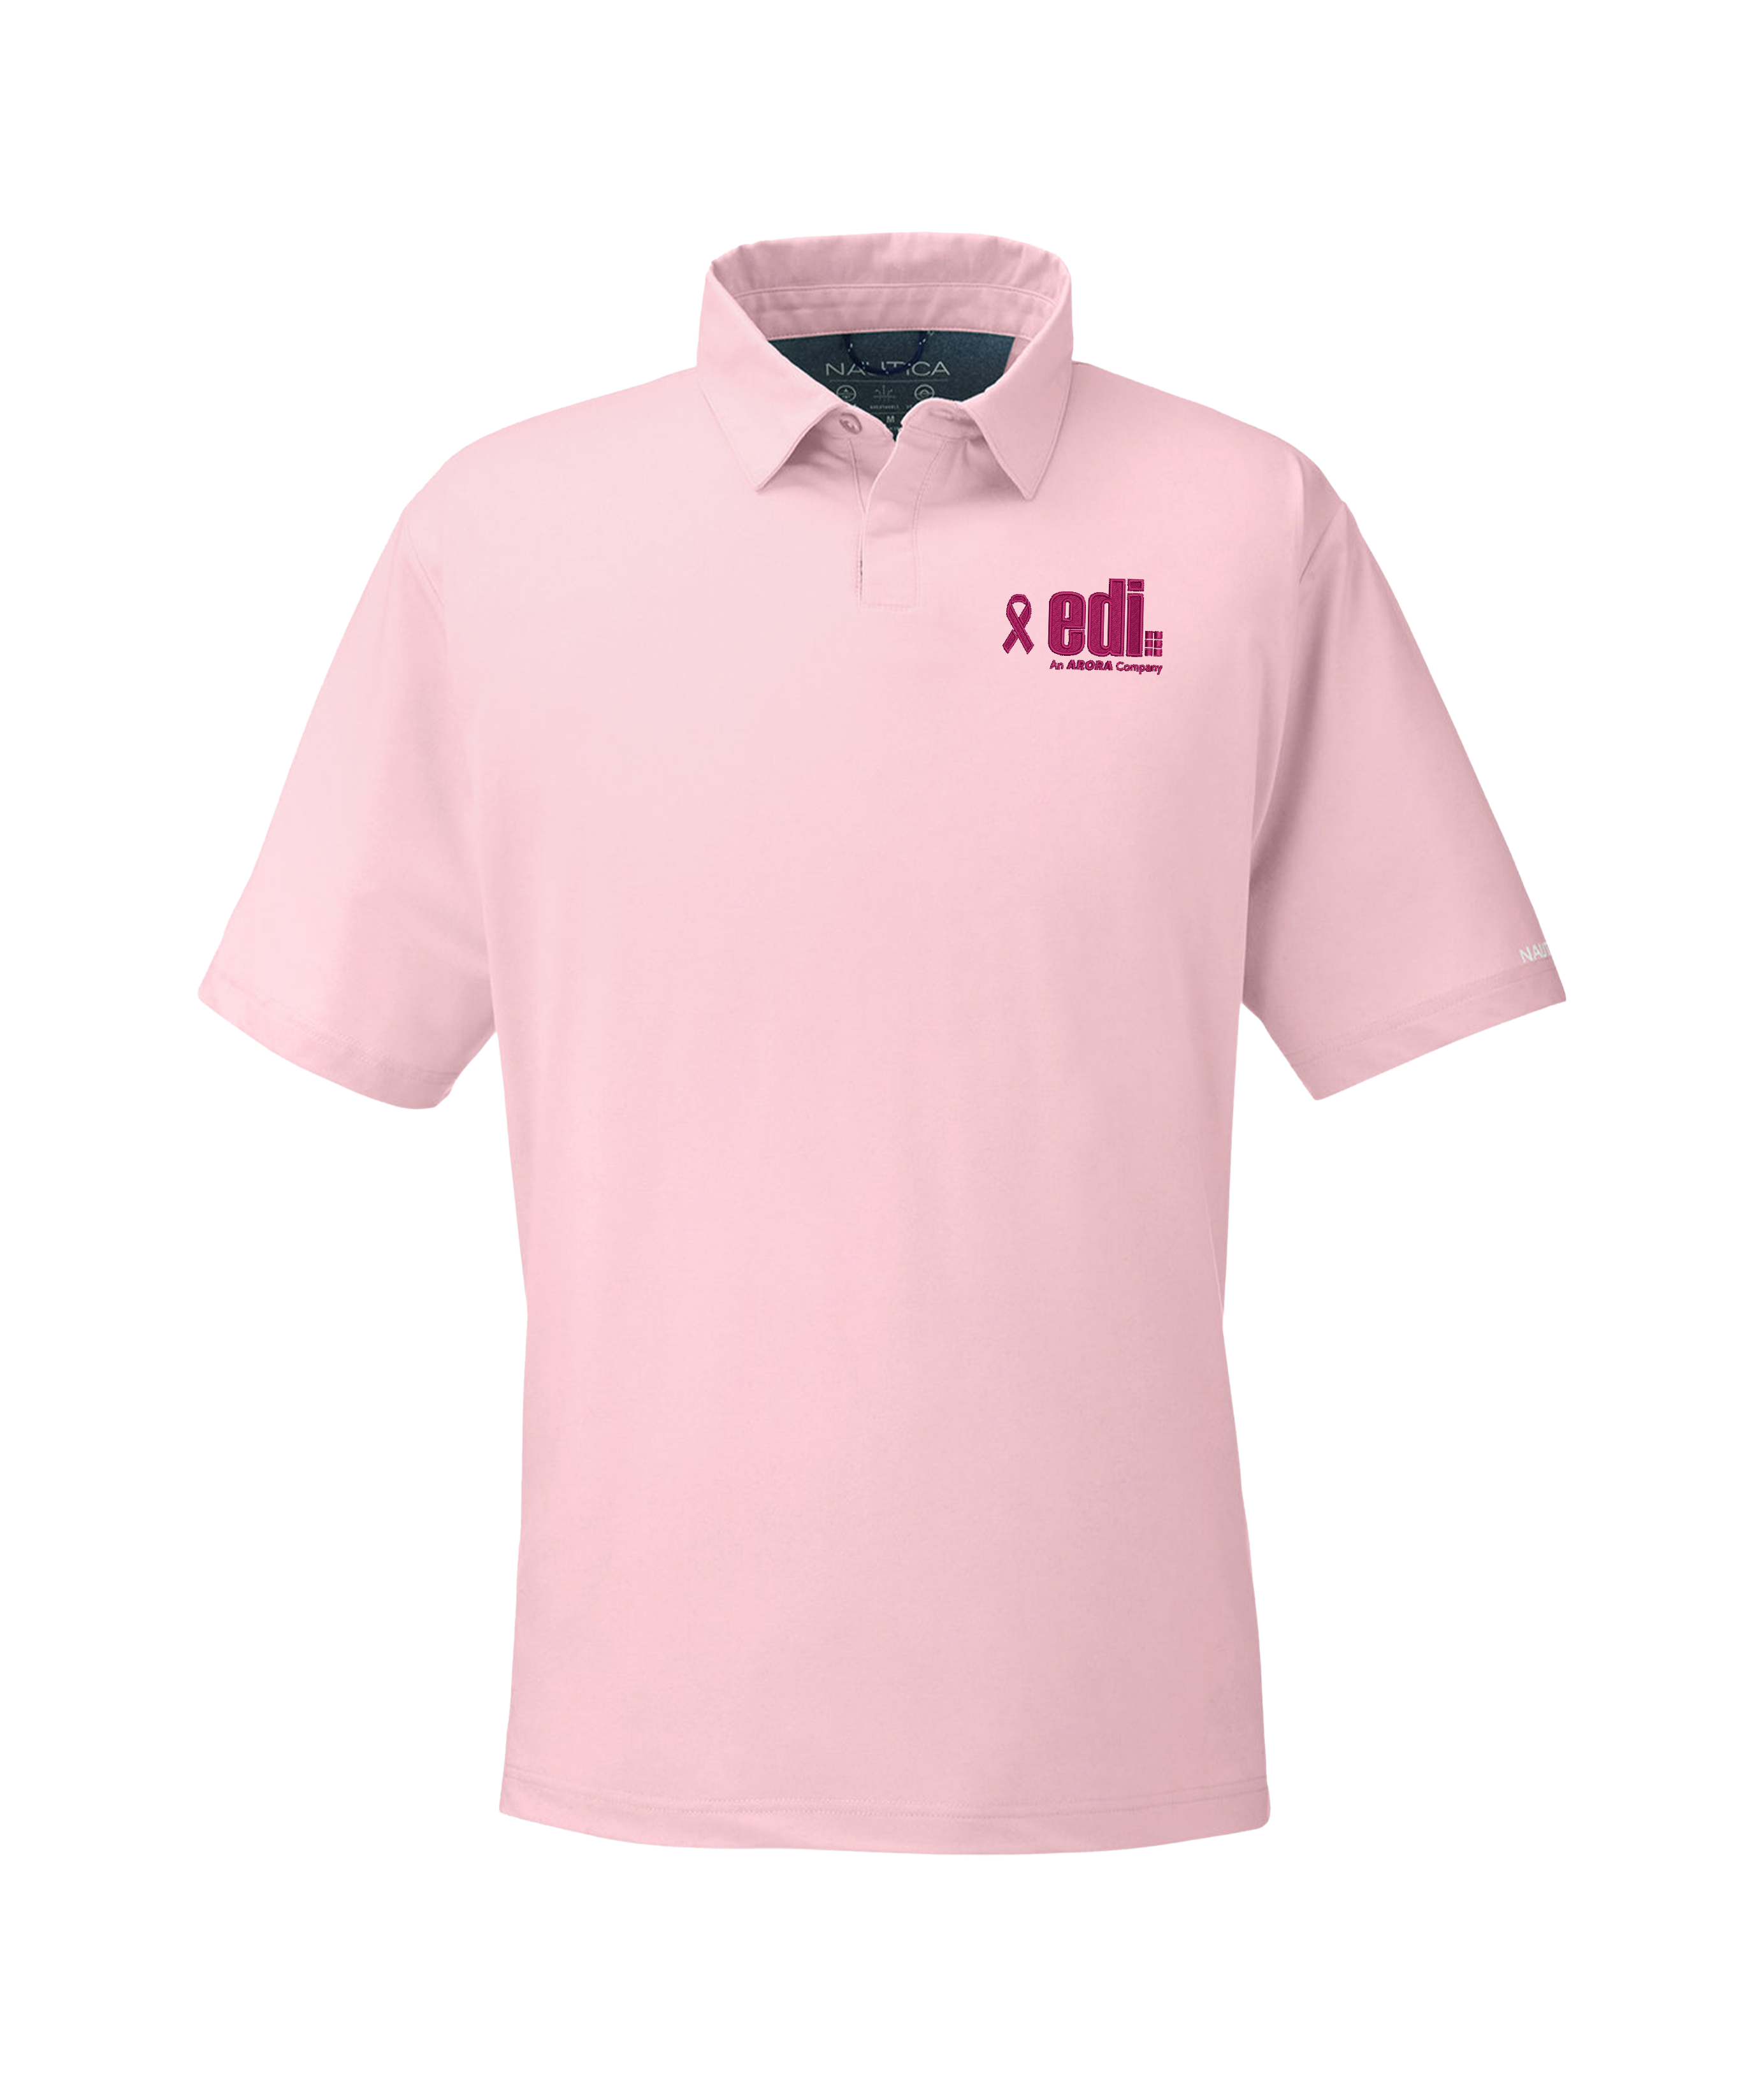 Nautica Men's Saltwater Stretch Polo for Breast Cancer Awareness